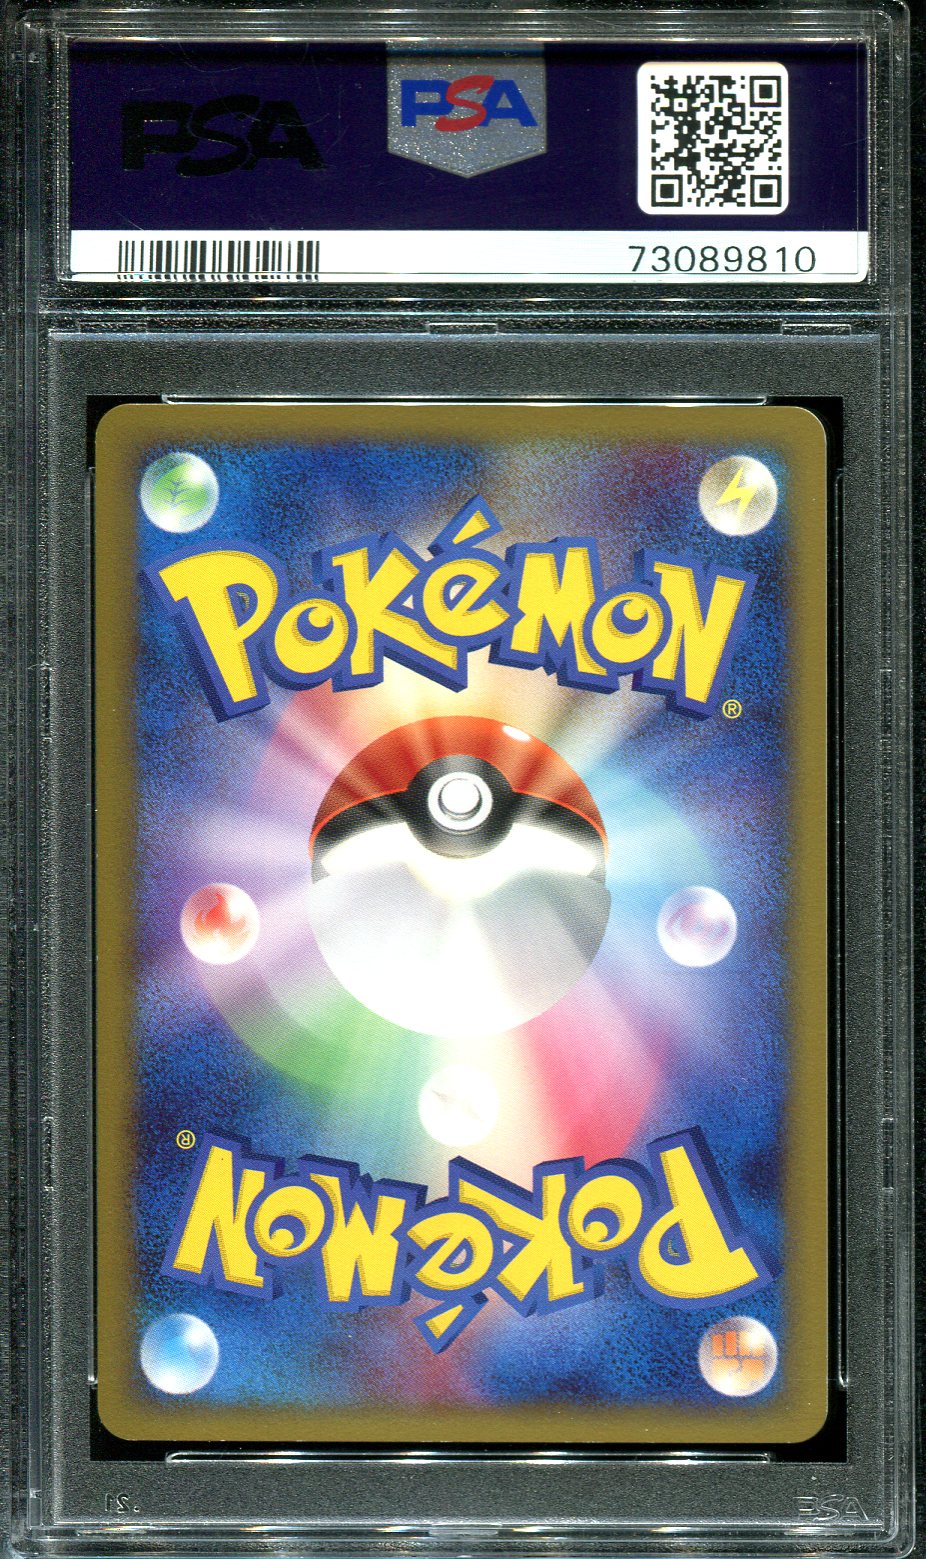 VILEPLUME 049 PSA 10 POKEMON CRY FROM THE MYSTERIOUS DP5 JAPANESE